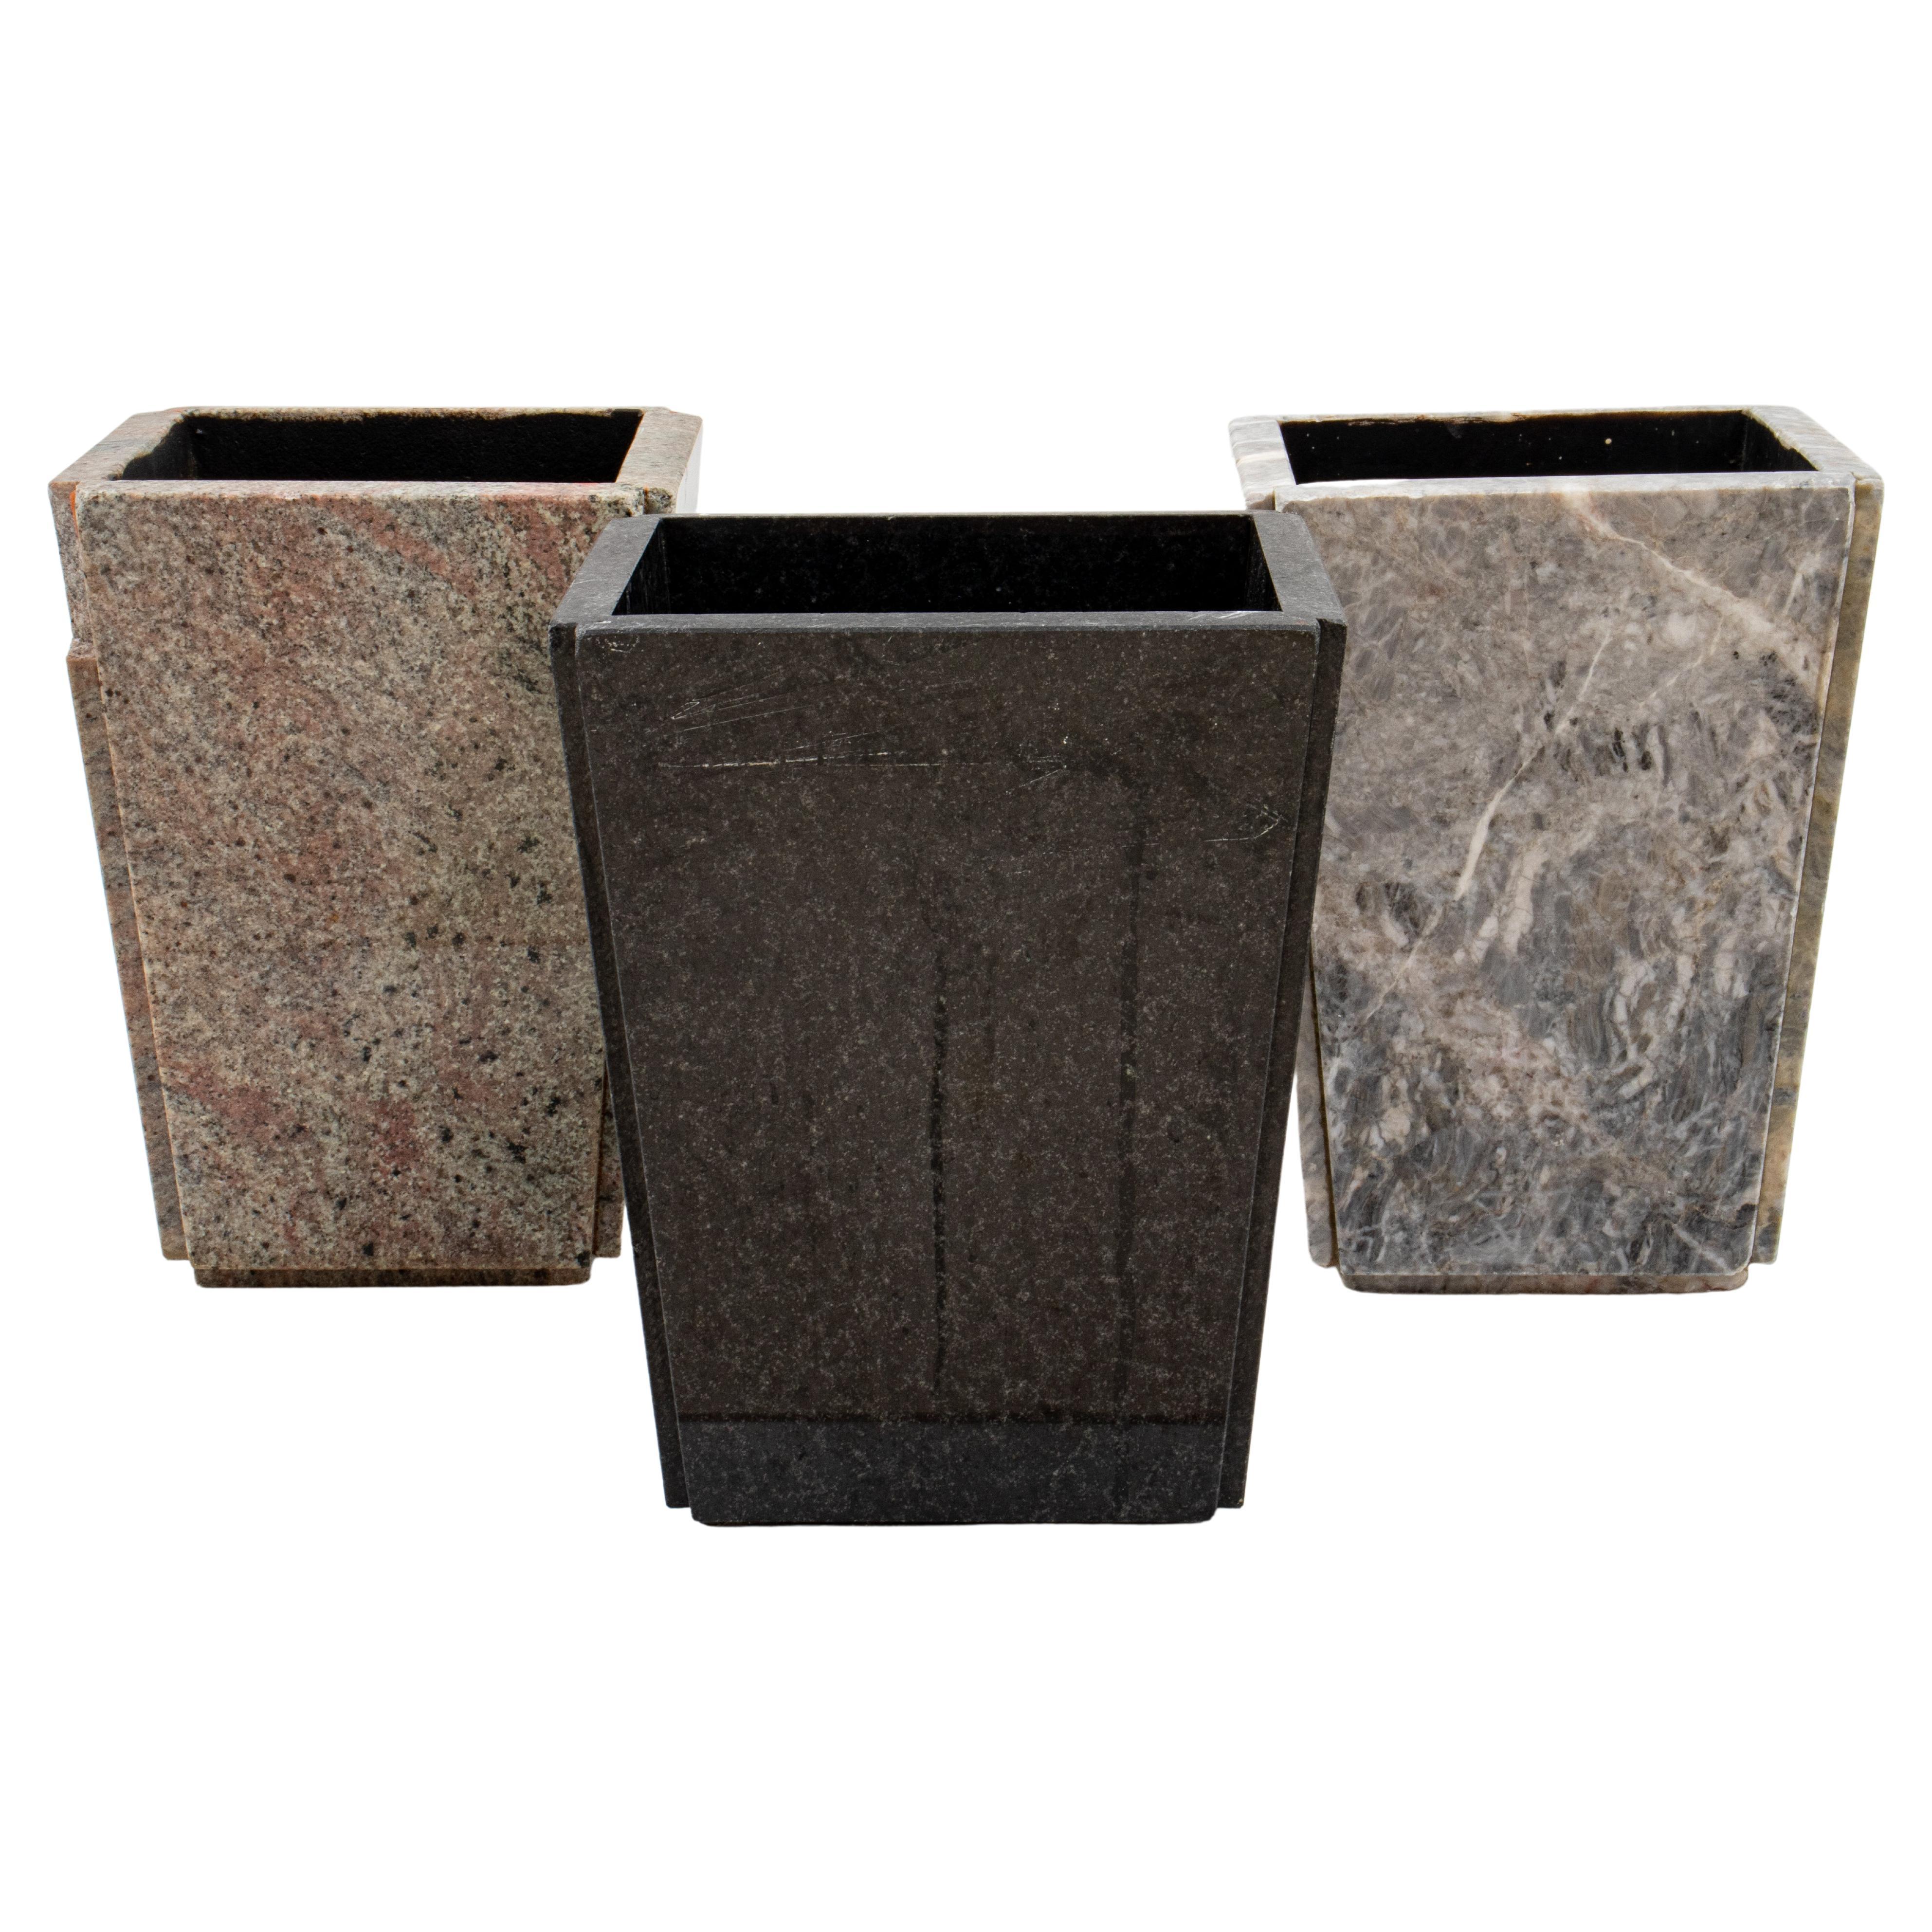 Hardstone Mounted Planters or Trash Cans, 3 For Sale